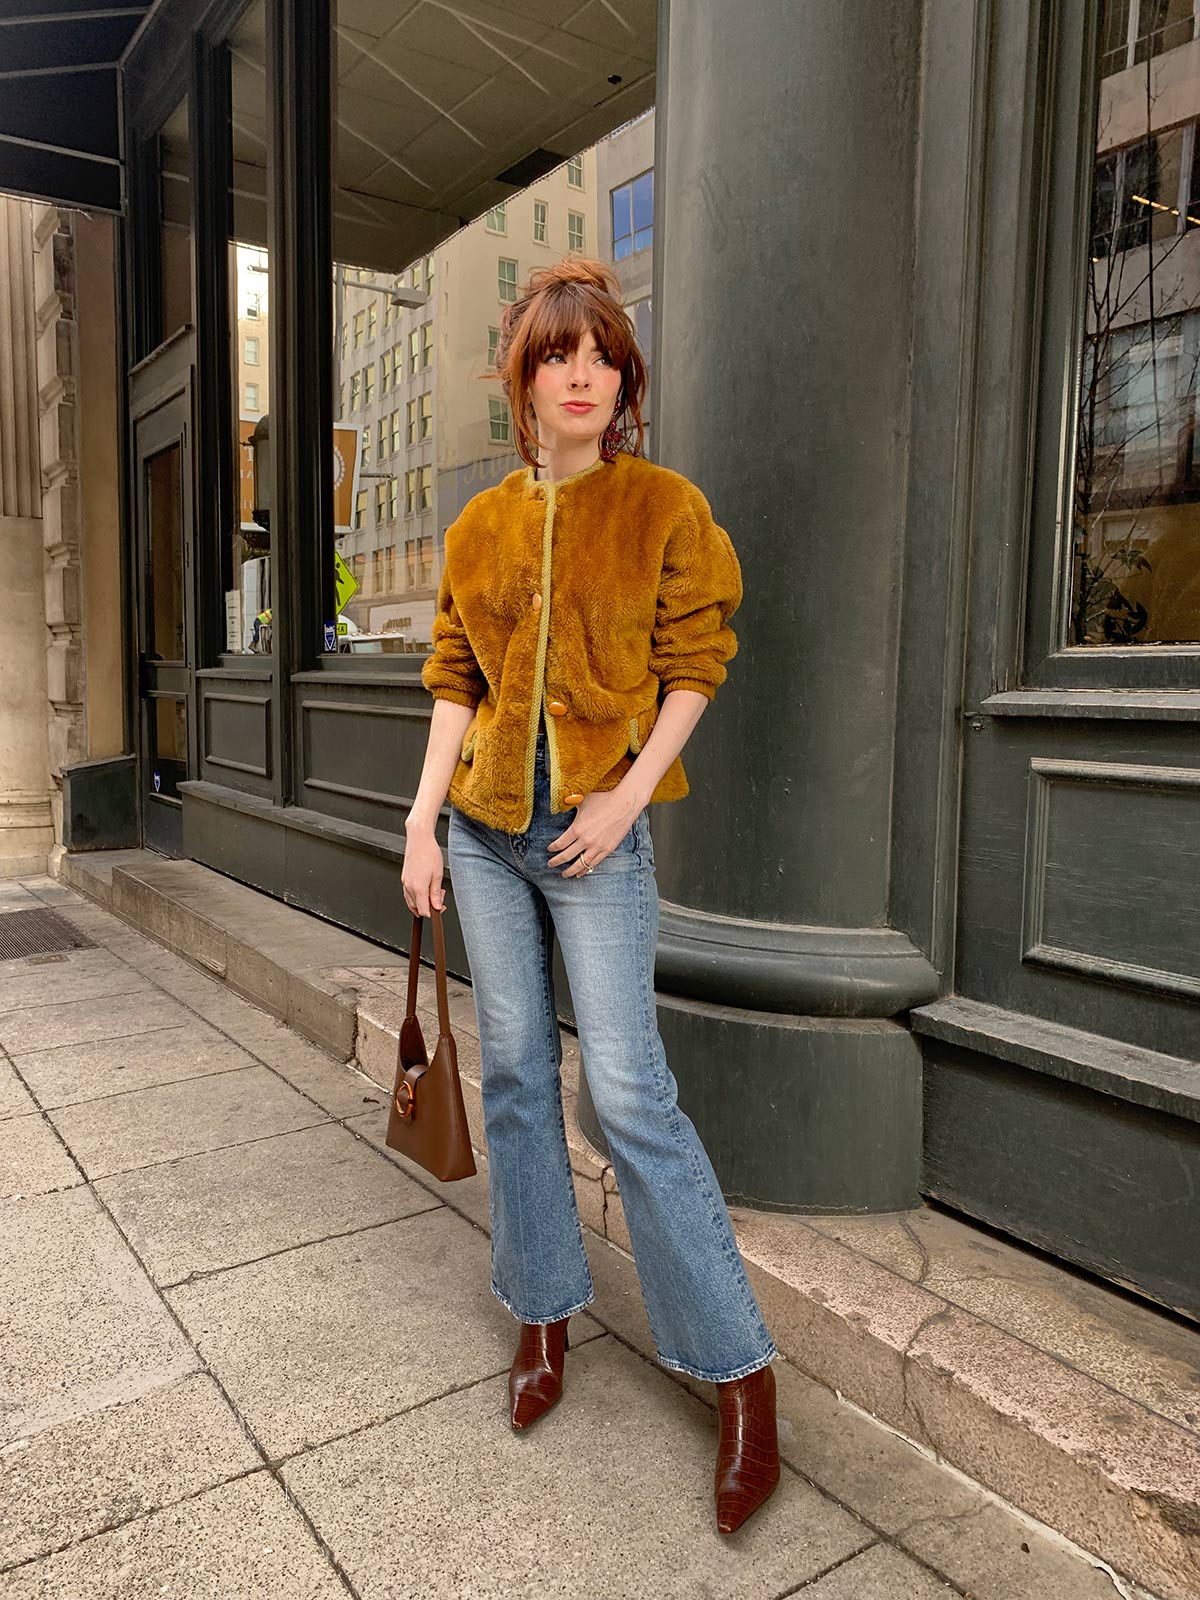 The Flare Jeans I am Obsessed With Right Now, Sea of Shoes